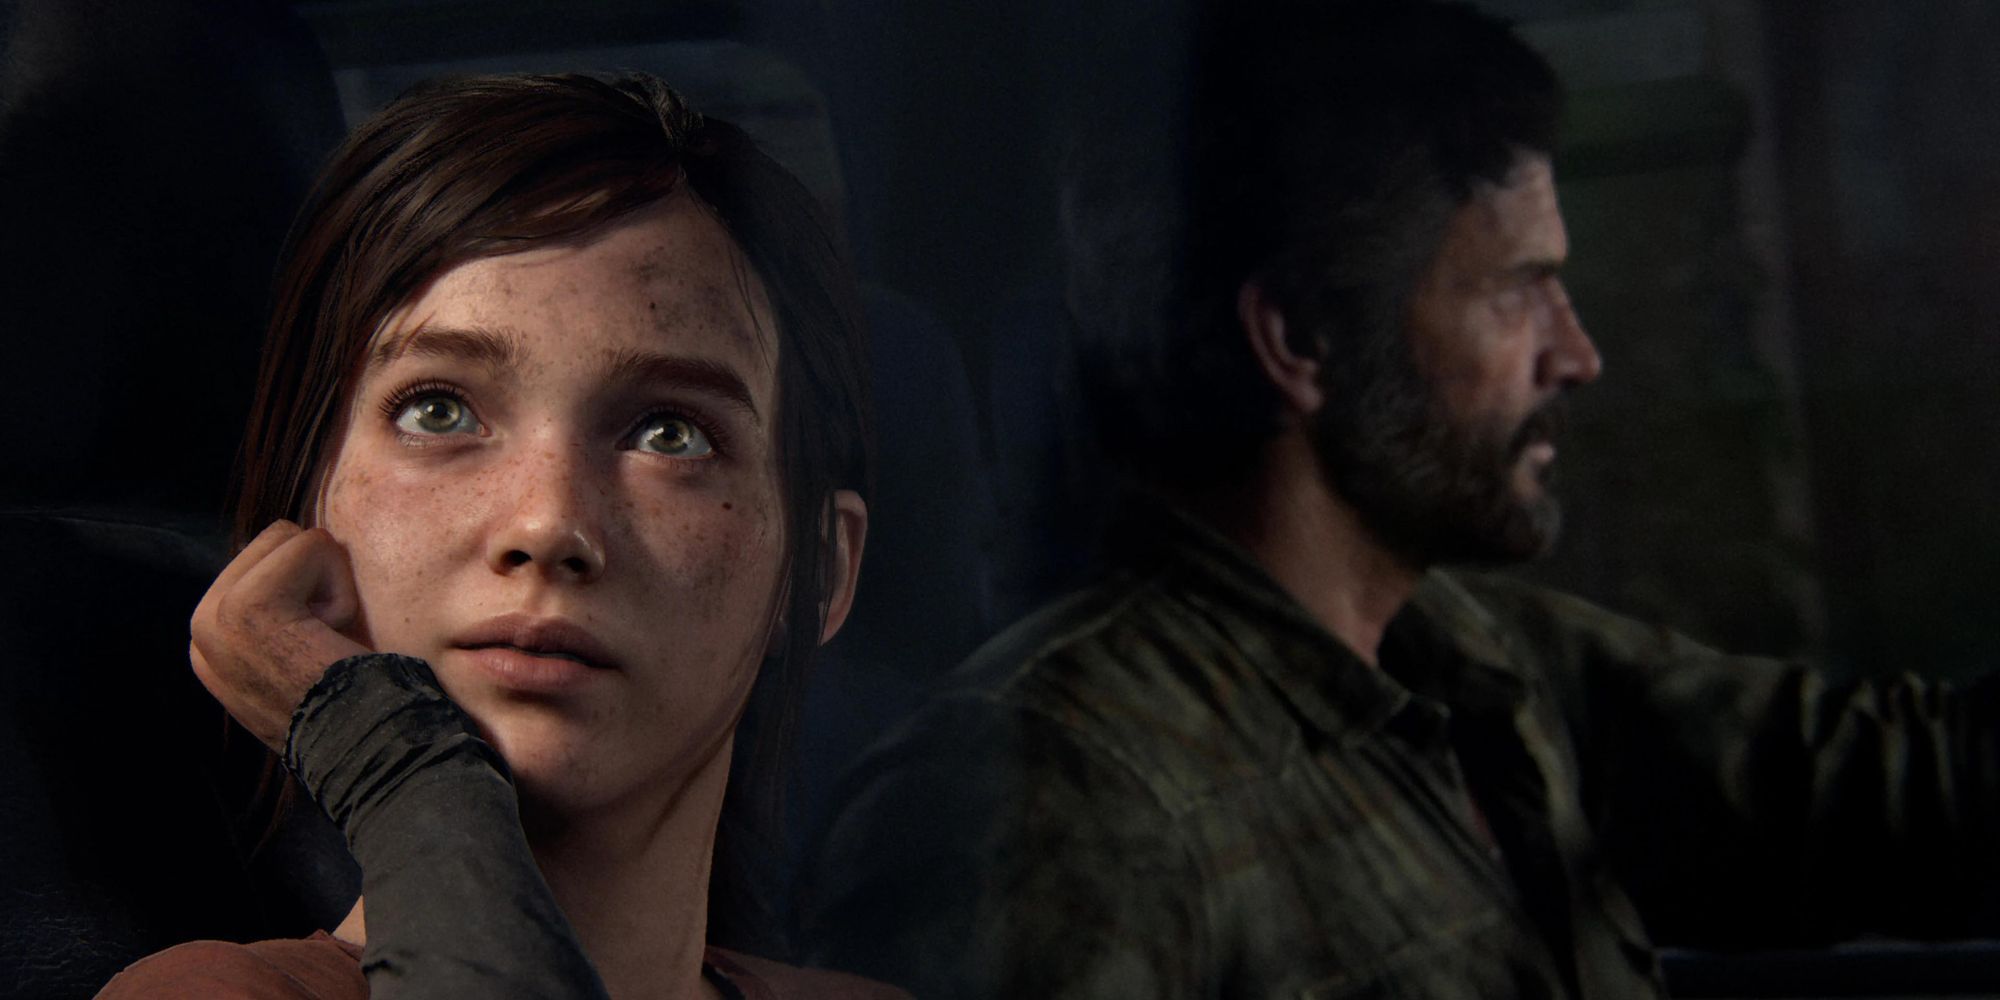 Ellie looks out the window of a car while Joel drives